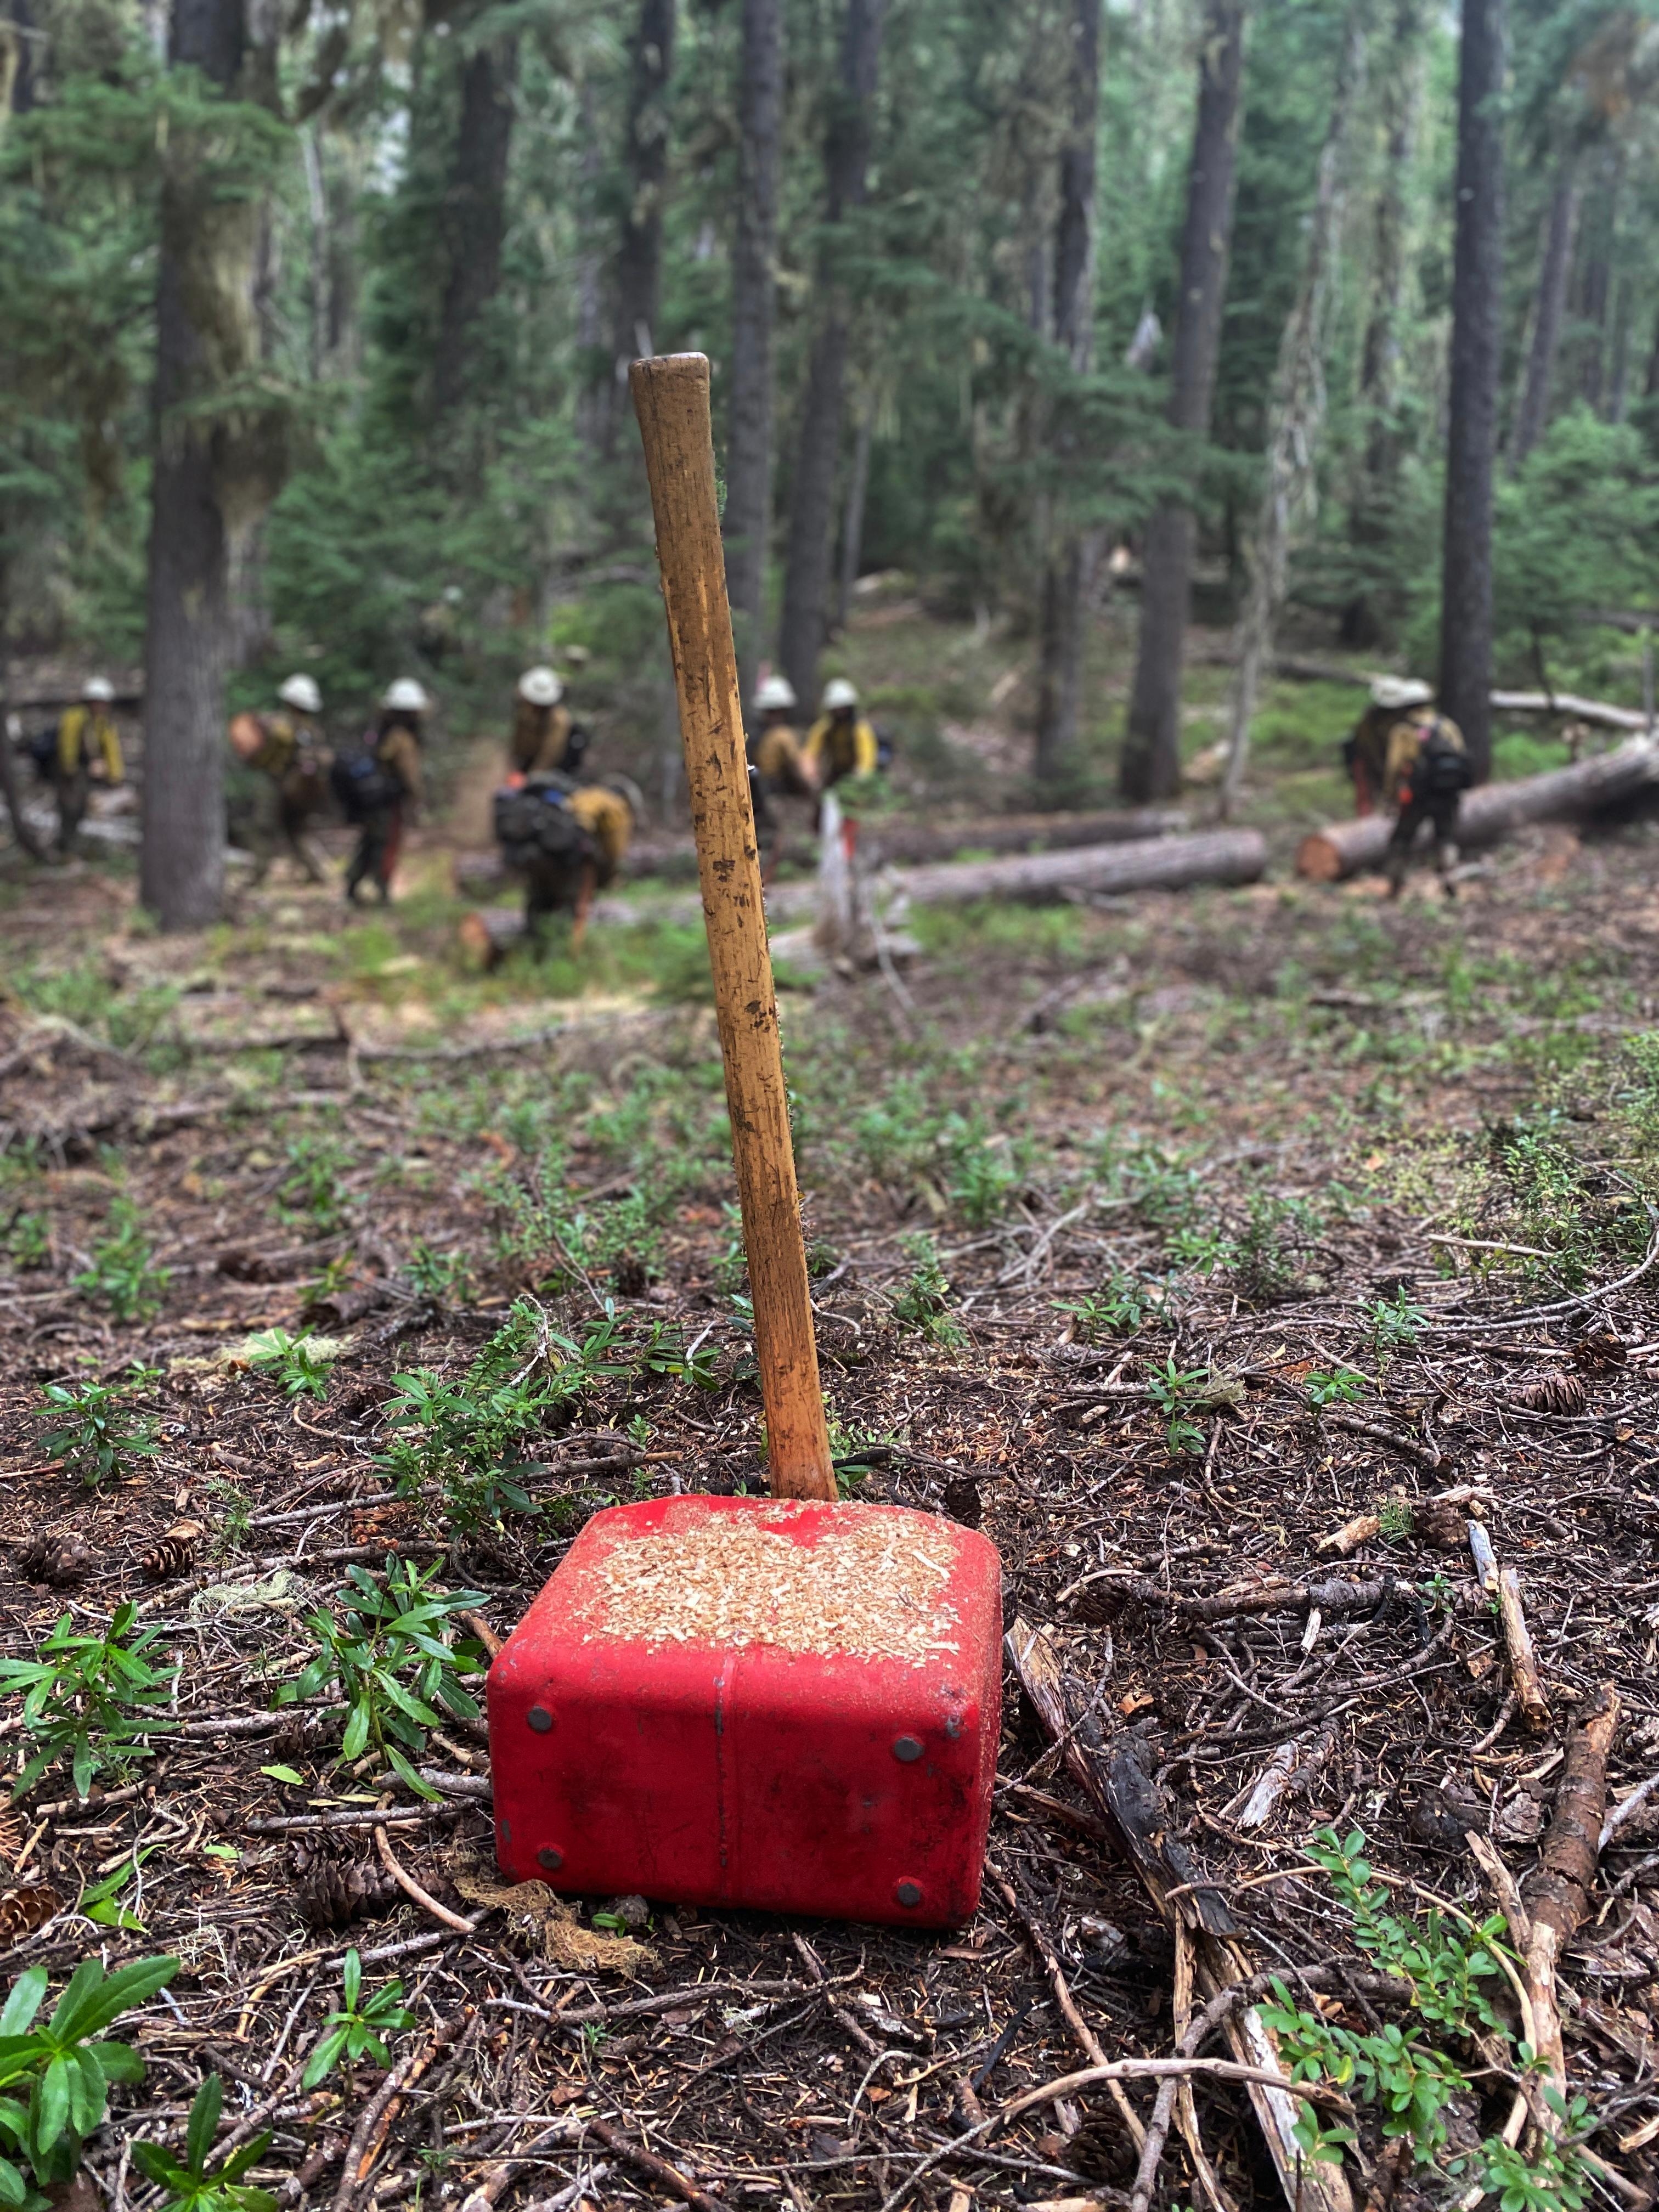 A fuel can with a wooden-handled tool leaning against it, is shown with firefighters working in a forest in the background.